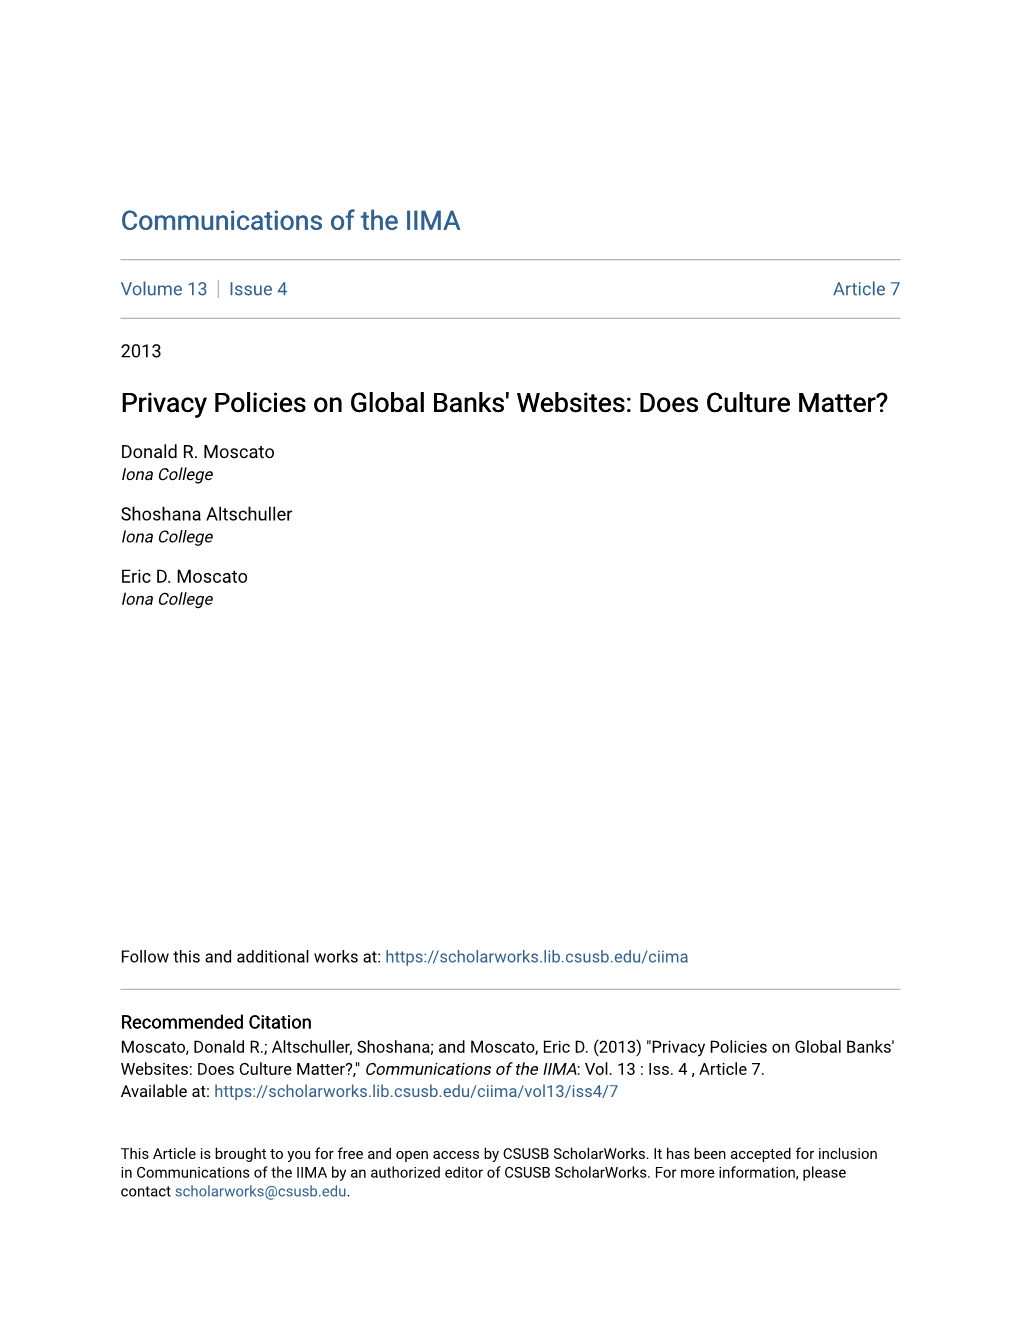 Privacy Policies on Global Banks' Websites: Does Culture Matter?